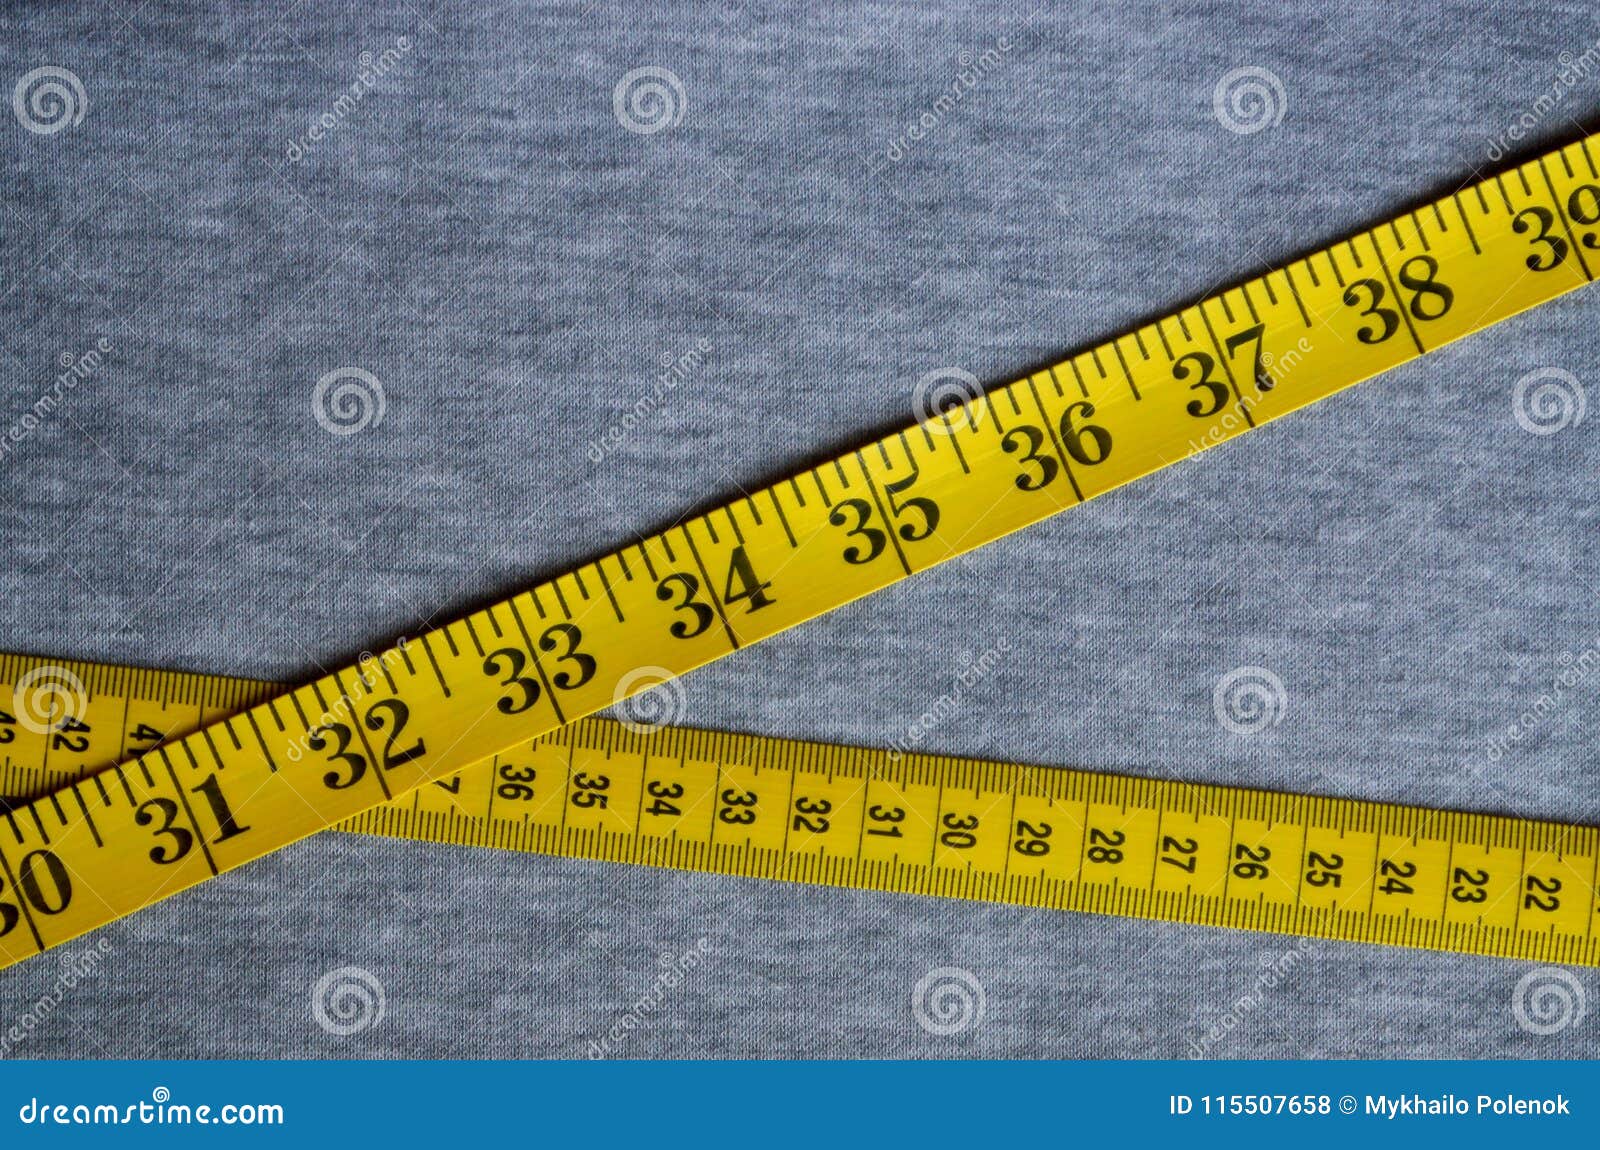 https://thumbs.dreamstime.com/z/yellow-measuring-tape-lies-gray-knitted-fabric-numerical-indicators-form-centimeters-inches-concept-115507658.jpg